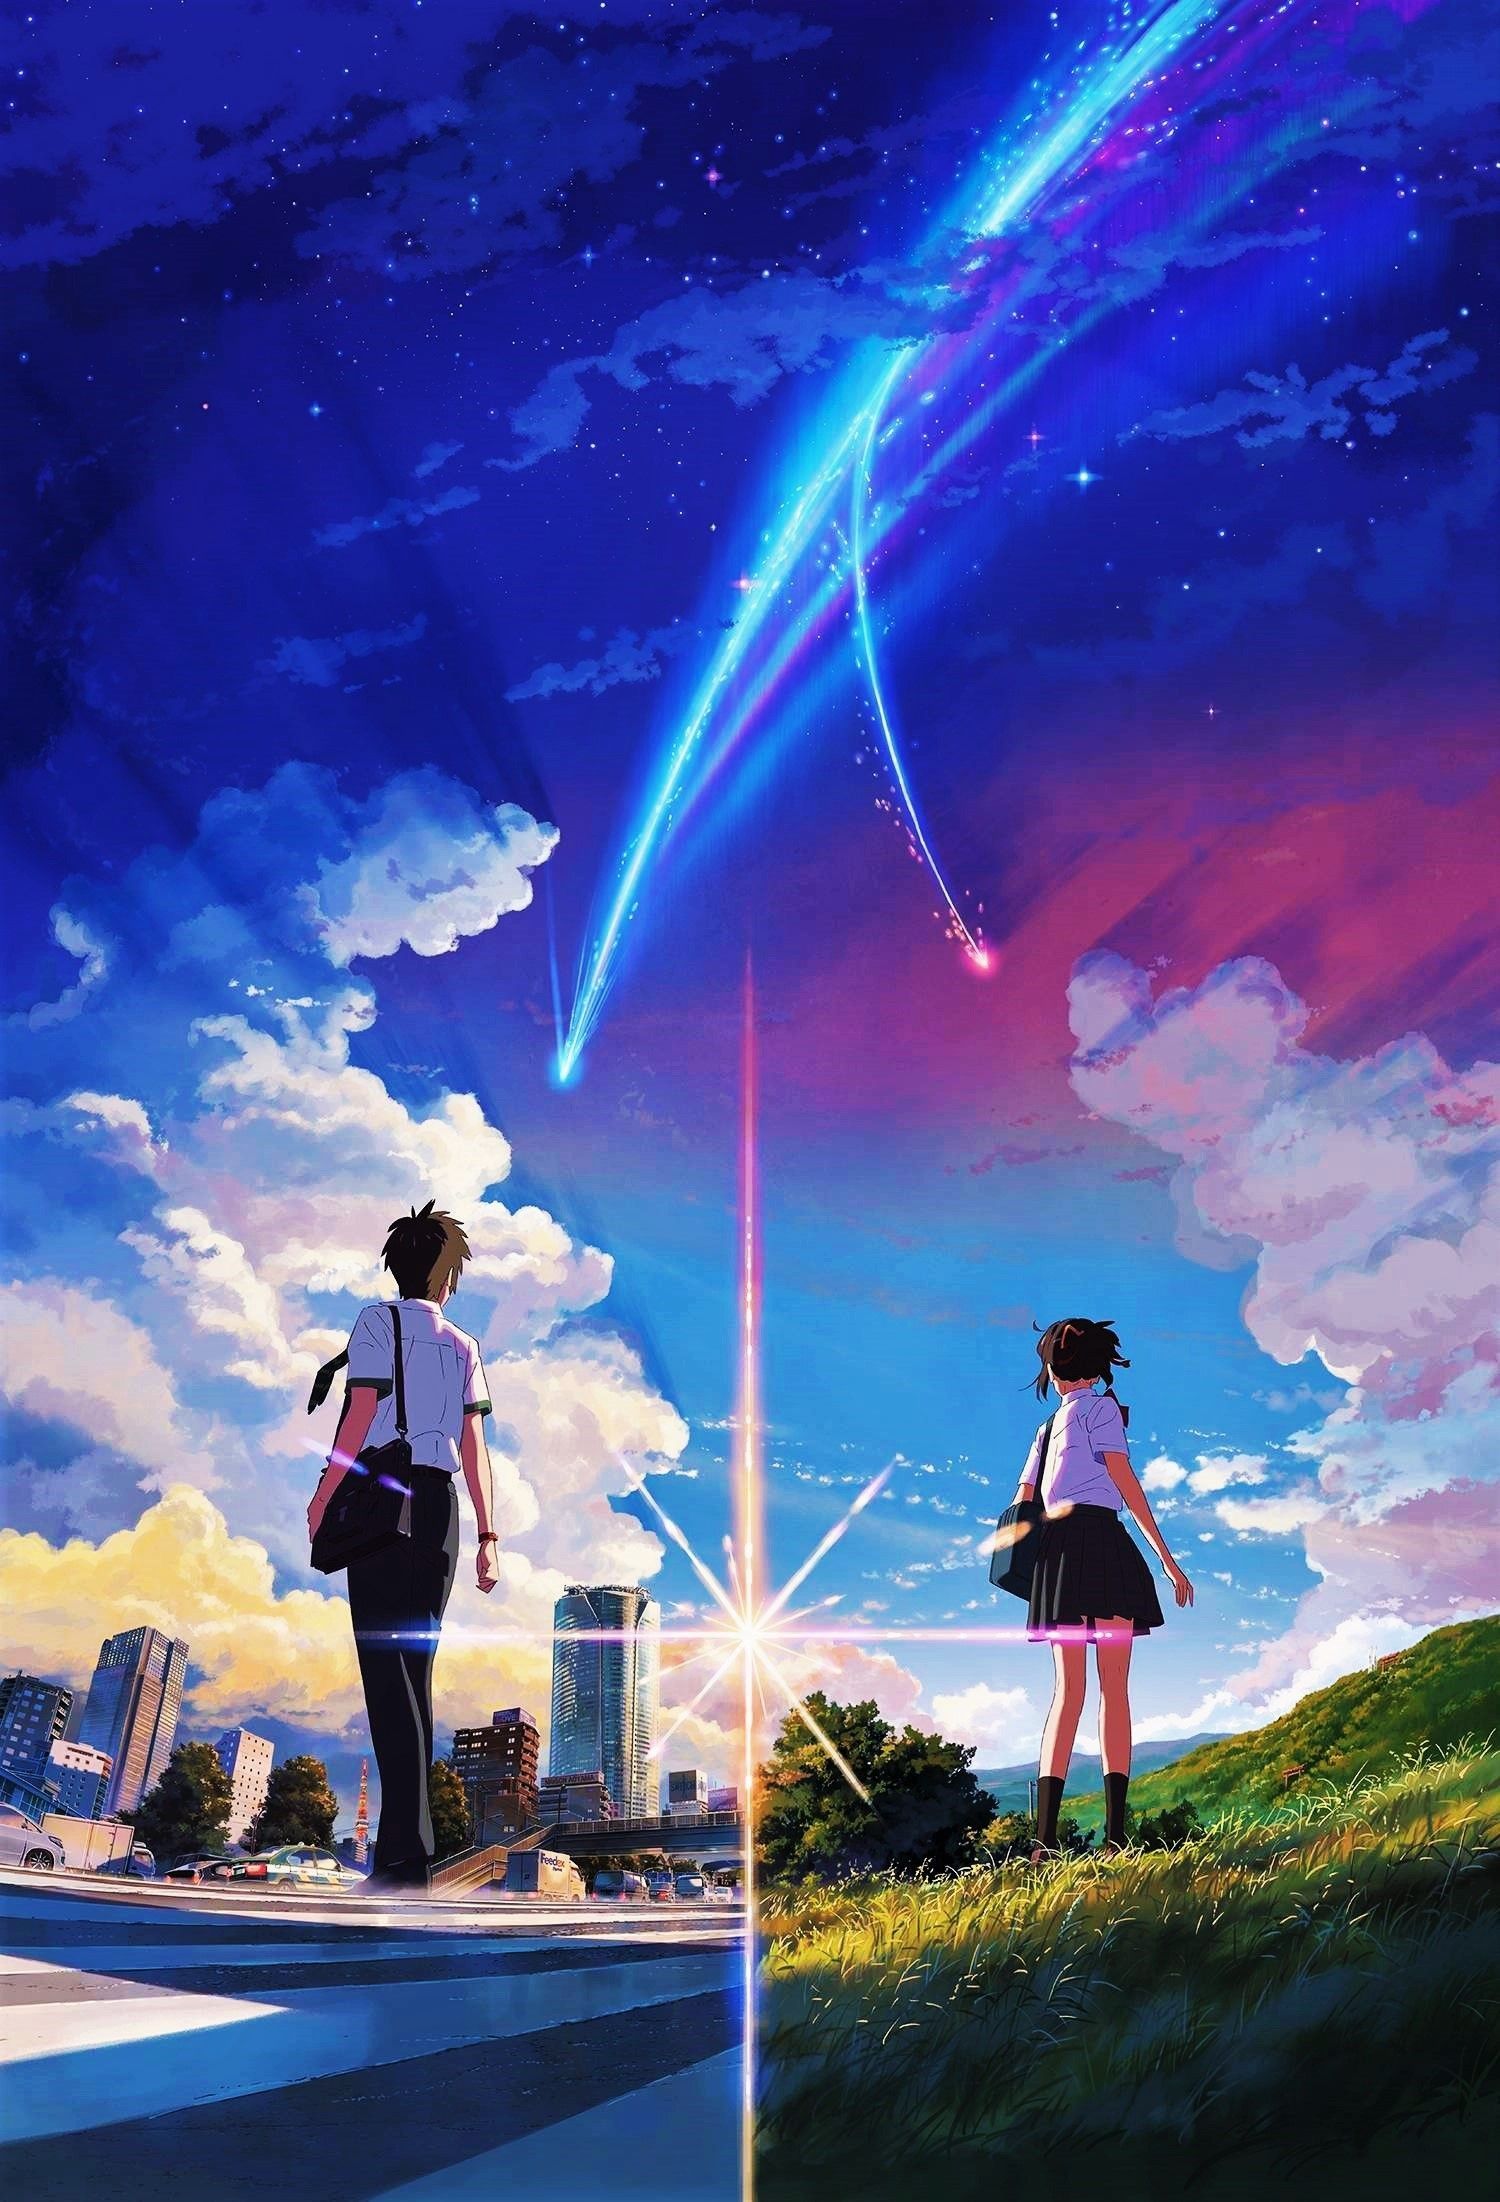 Your Name. Wallpapers